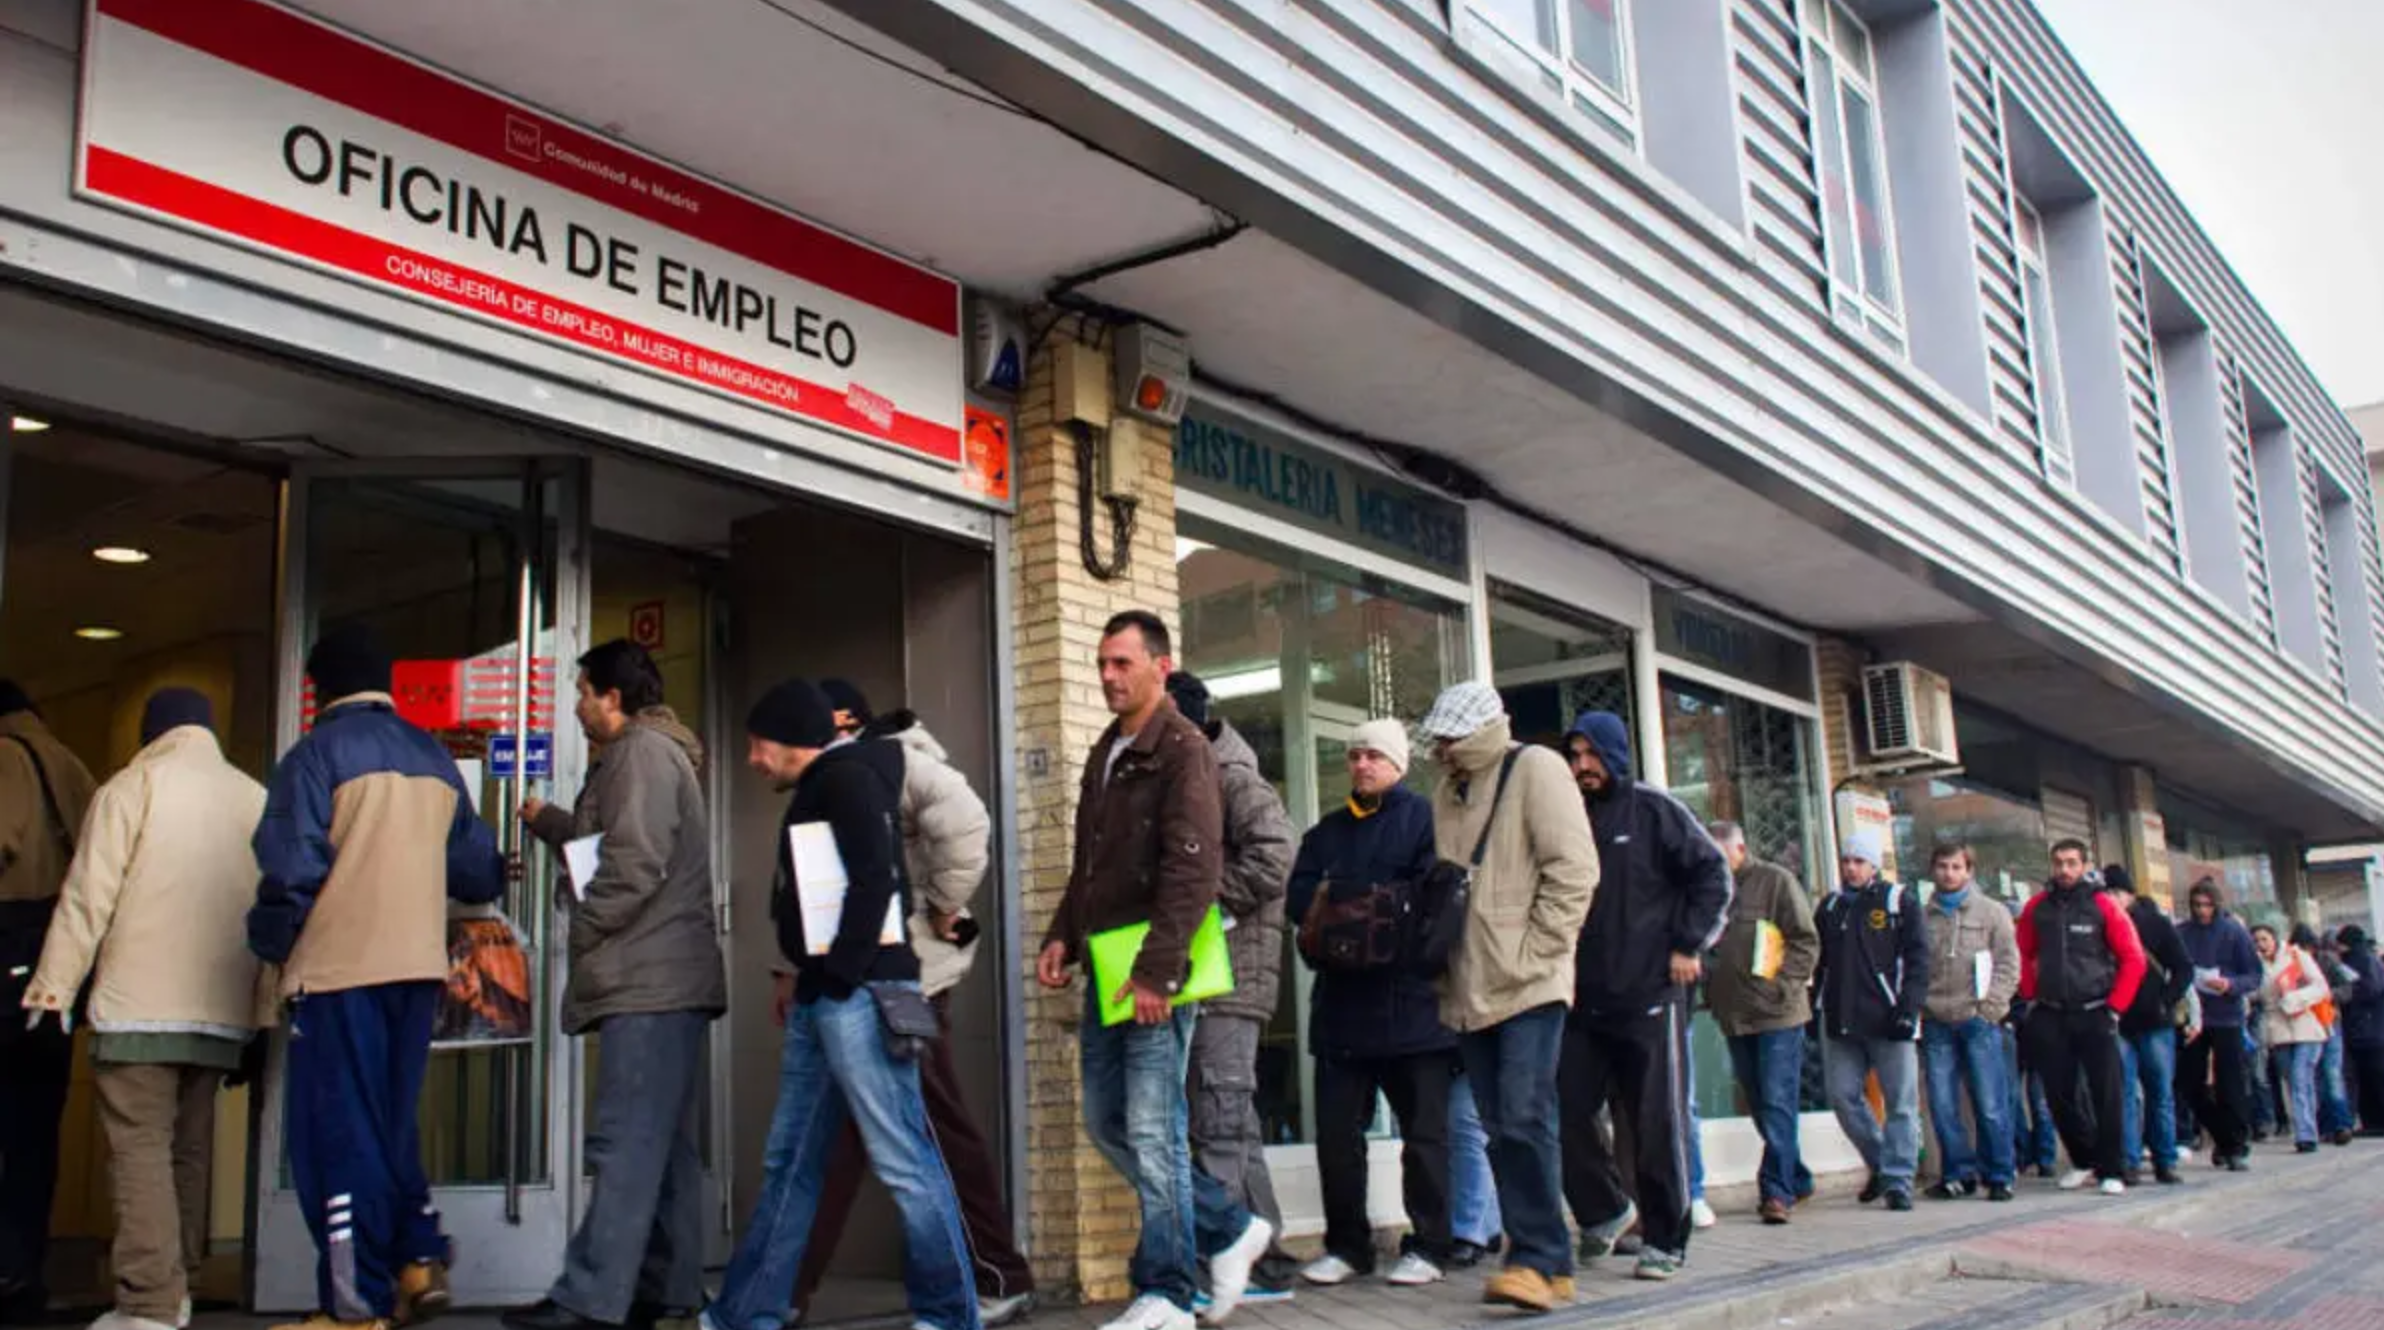 Unemployment rate in Spain rises to highest level in five years